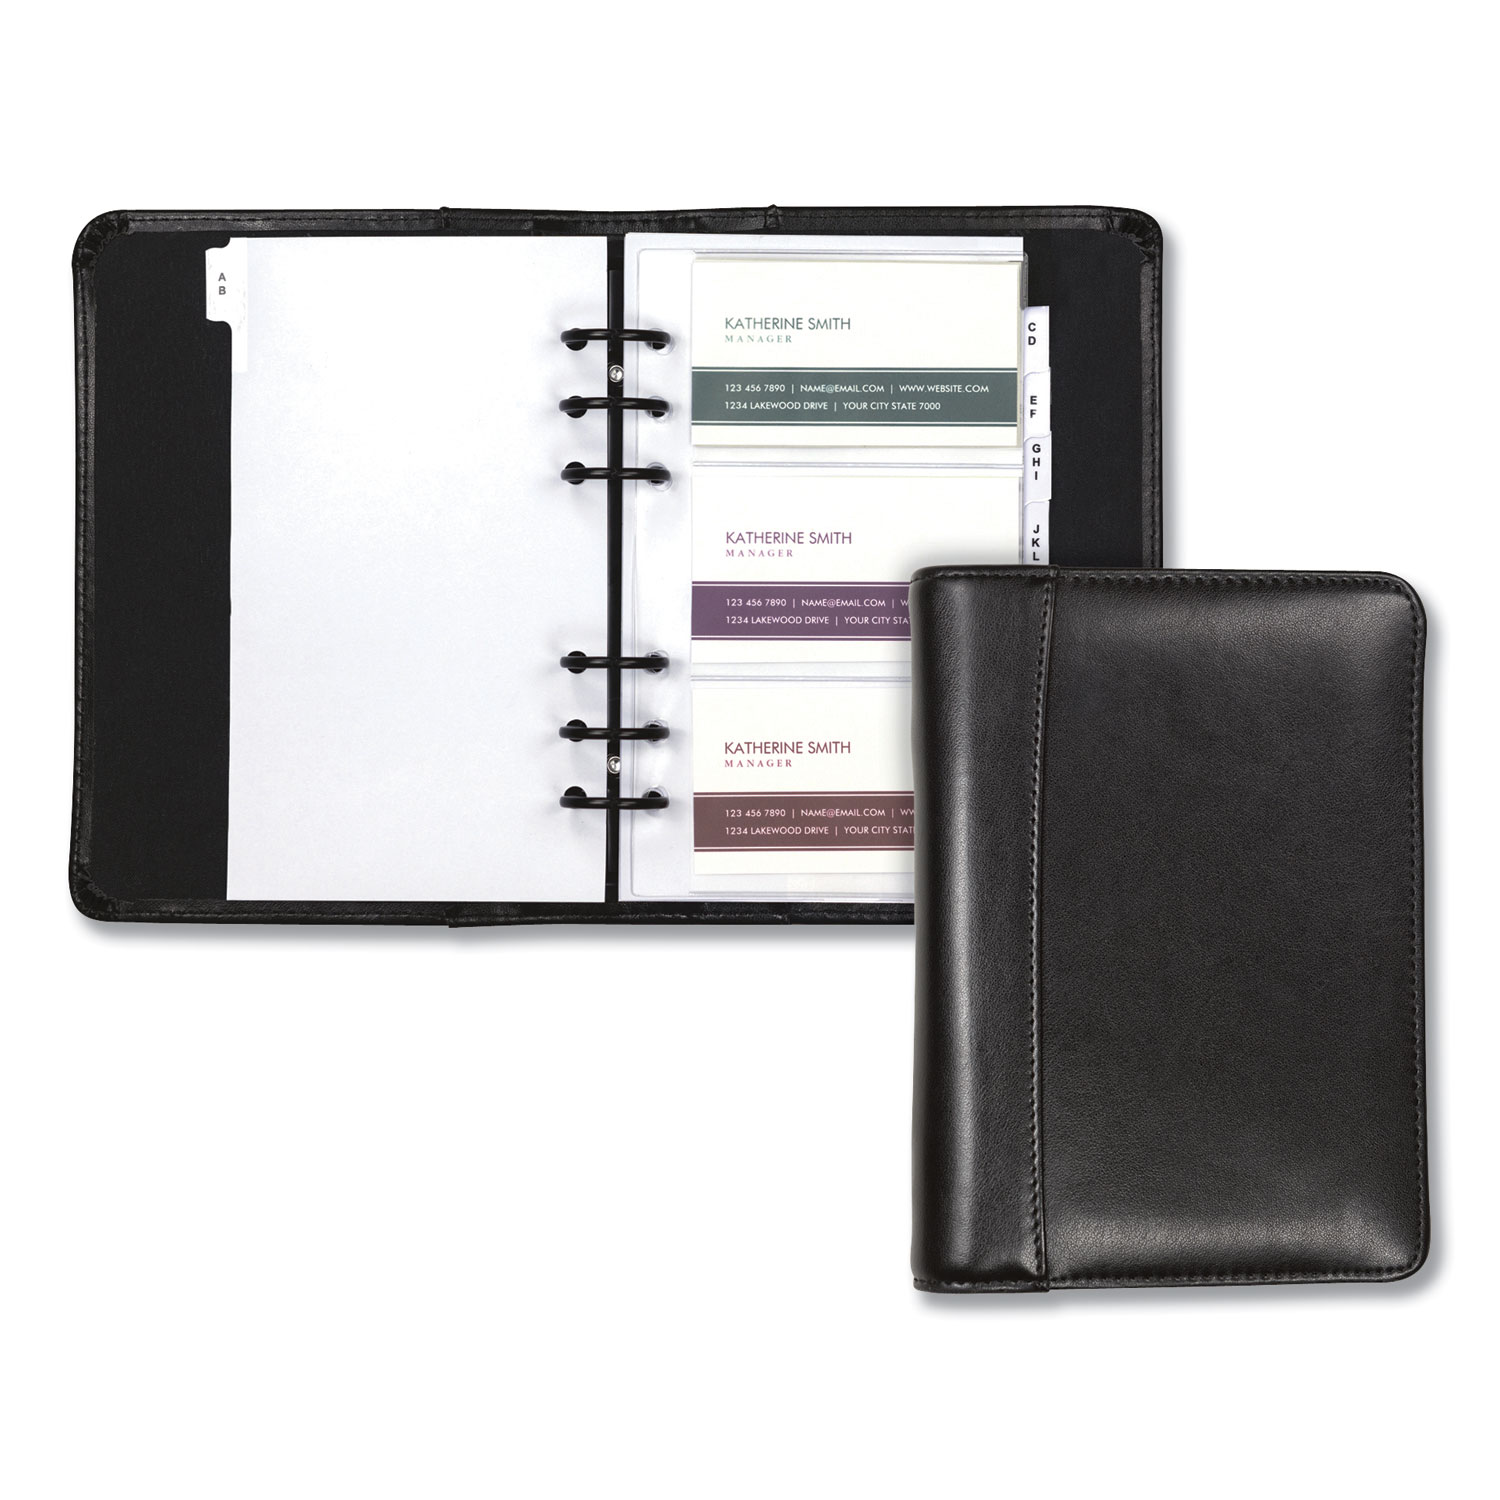 Samsill Regal Business Card Binder - 120 Capacity - 6-ring Binding - Refillable - Black Leather Cover